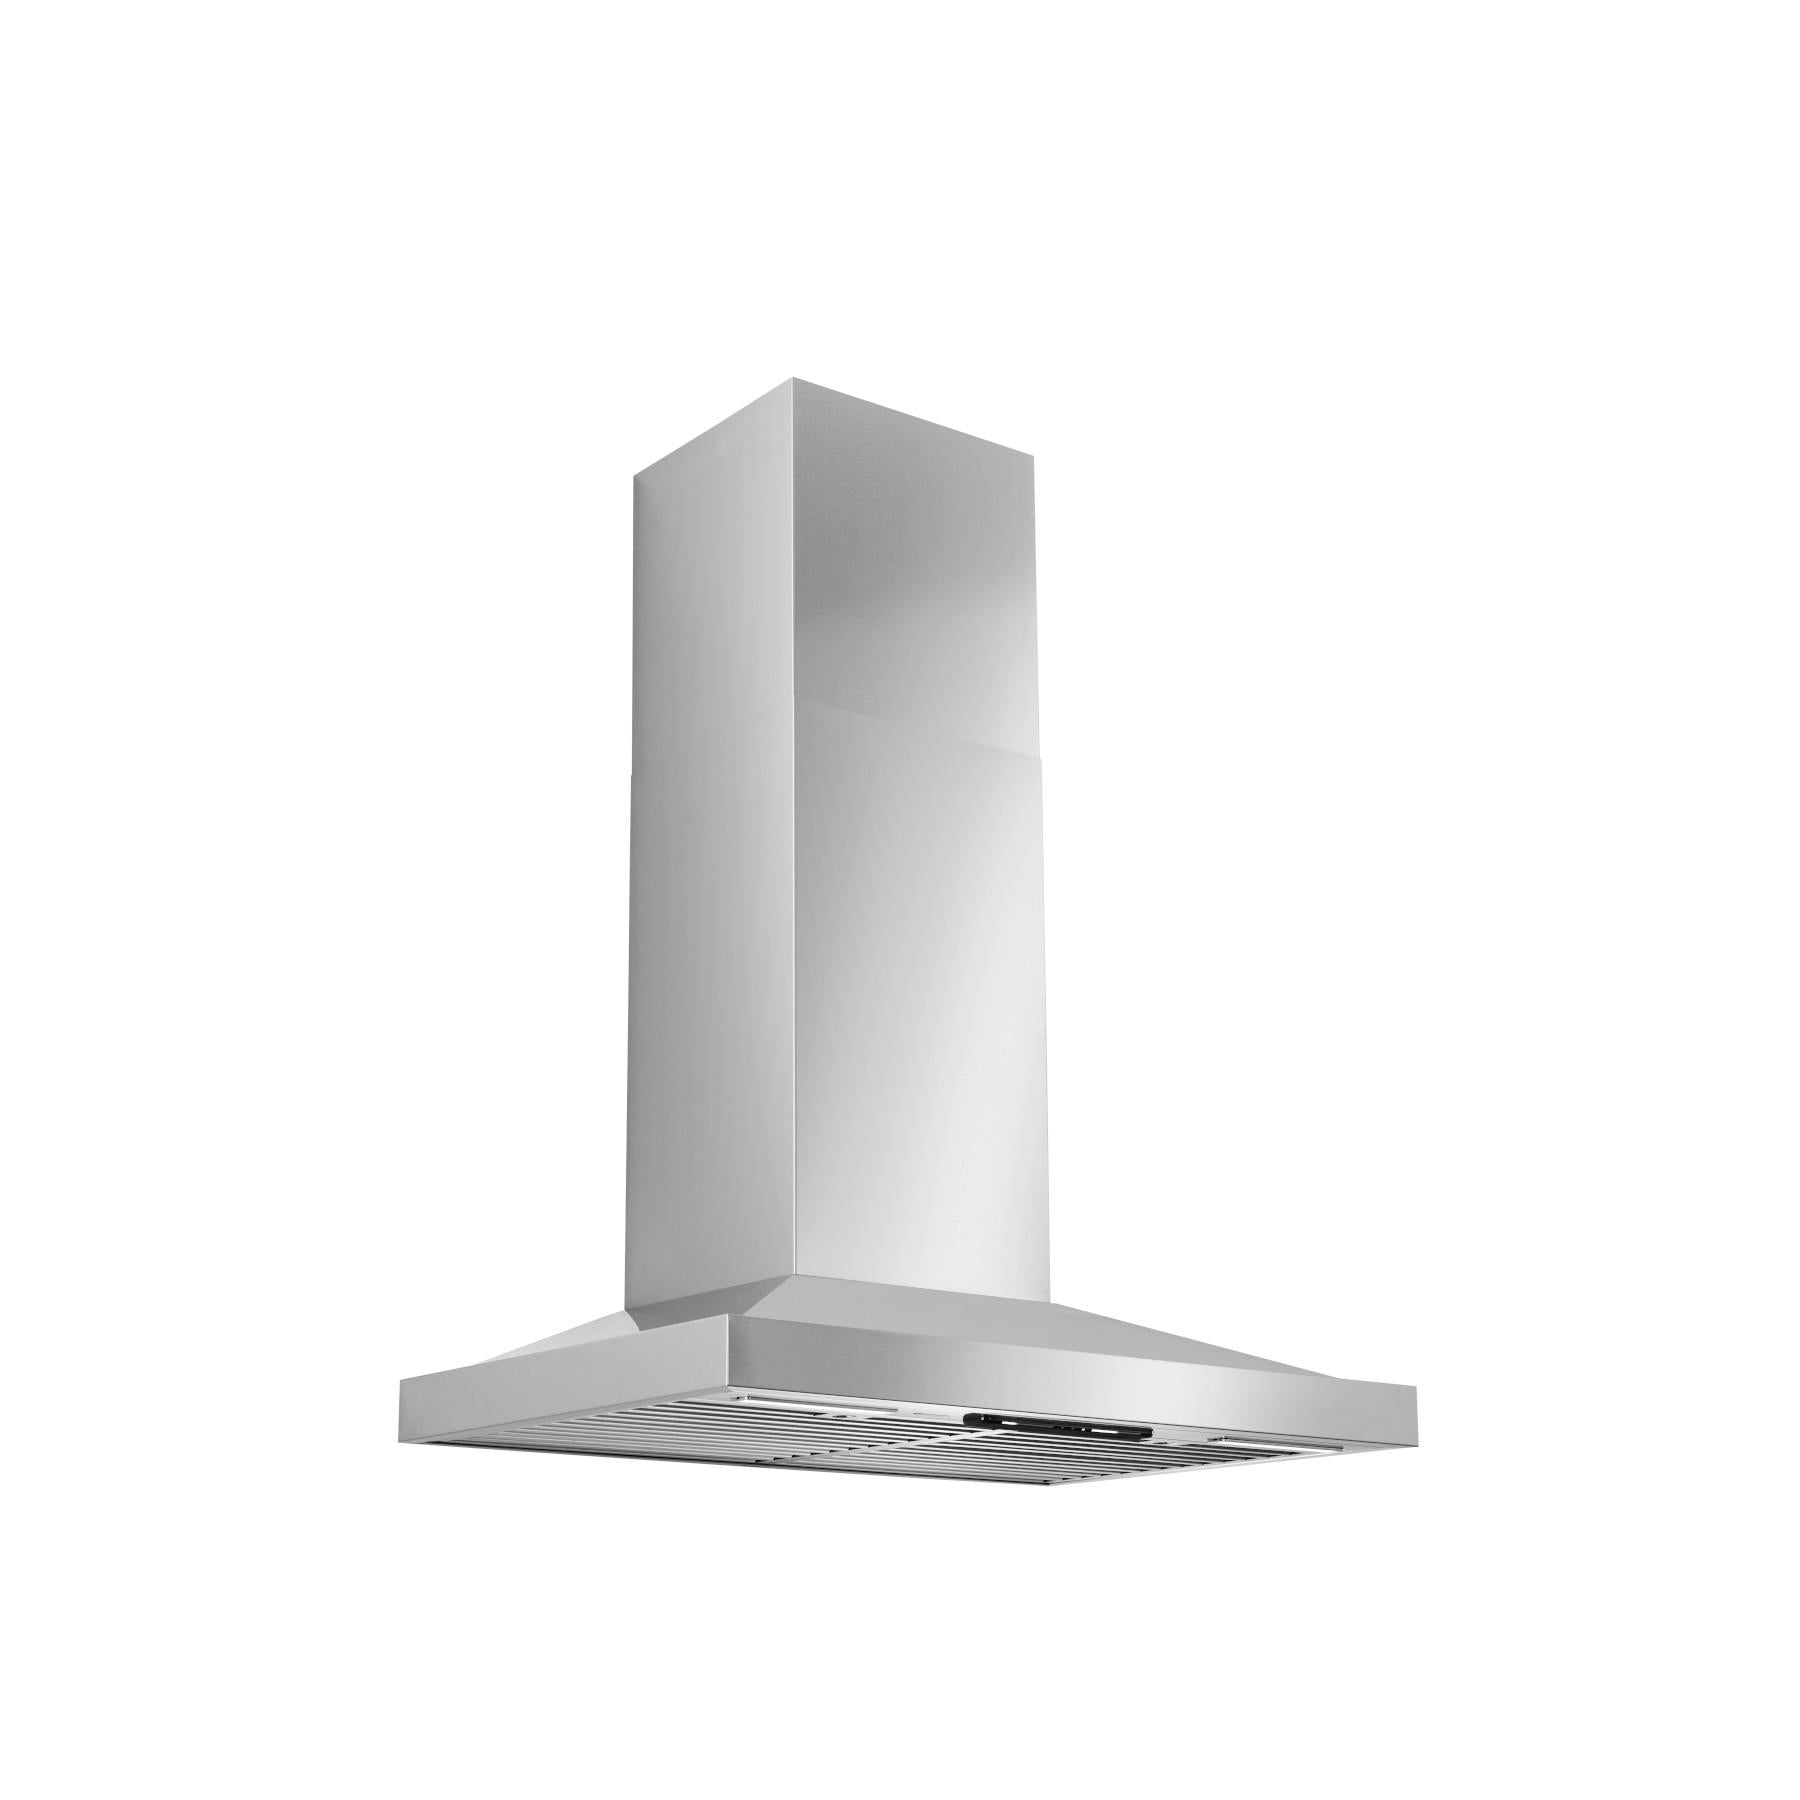 Best Range Hoods WCS1306SS 30-Inch Wall Mount Chimney Hood W/ Smartsense® And Voice Control, 650 Max Blower Cfm, Stainless Steel (Wcs1 Series)